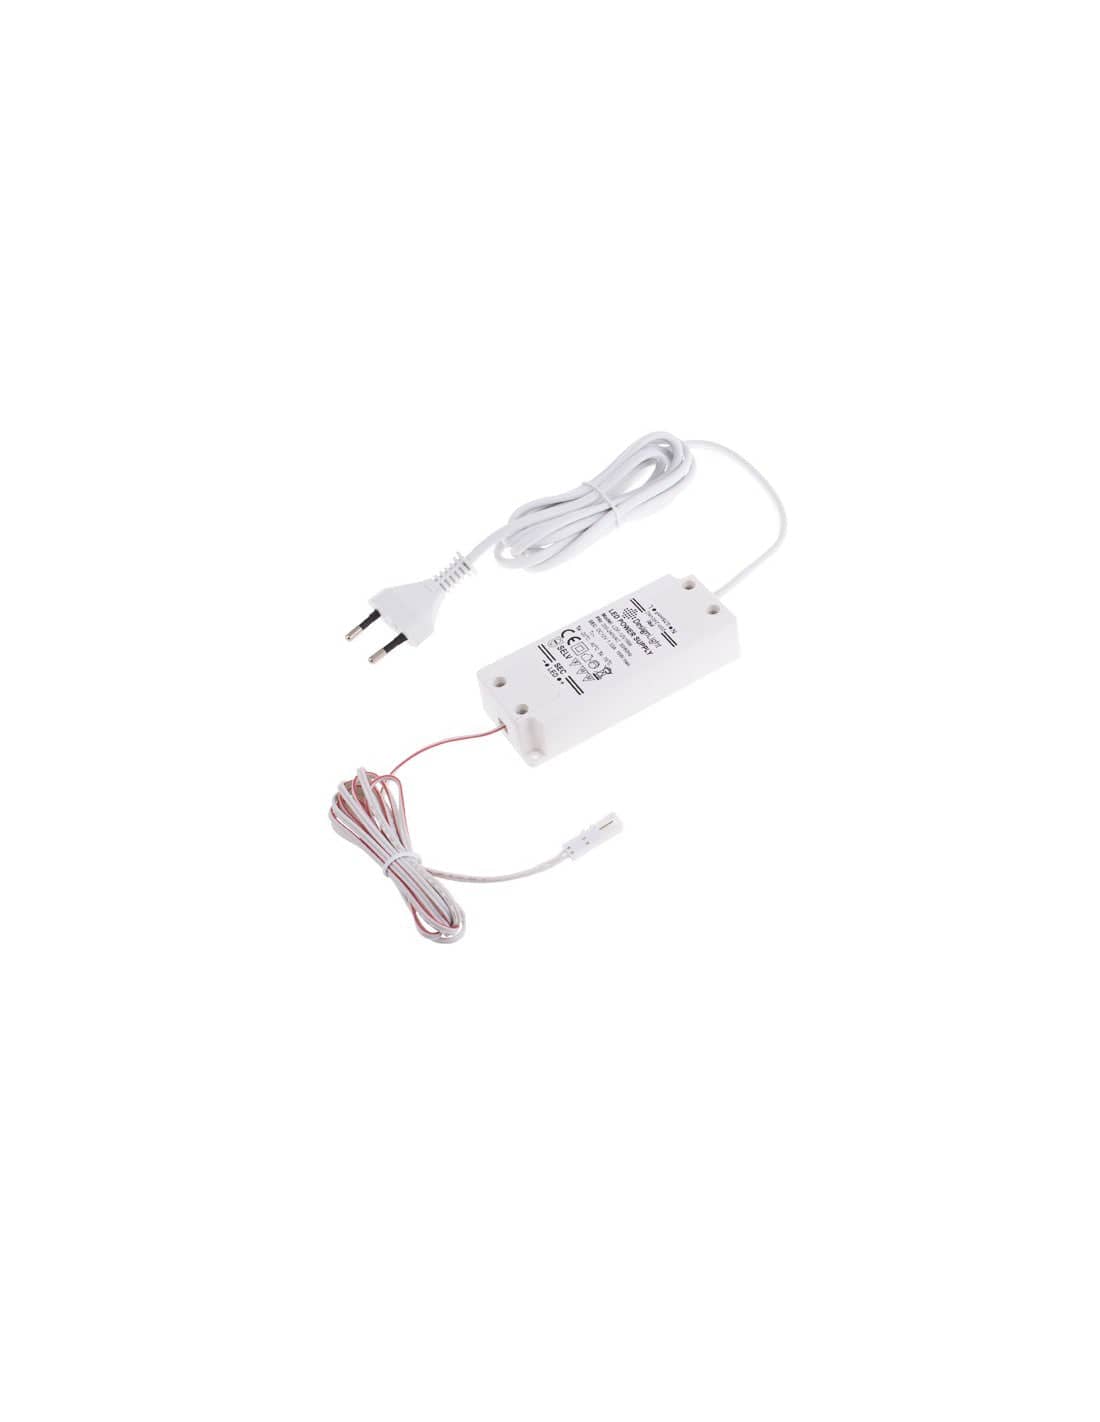 LED Driver Standard Plus 12v 16w with